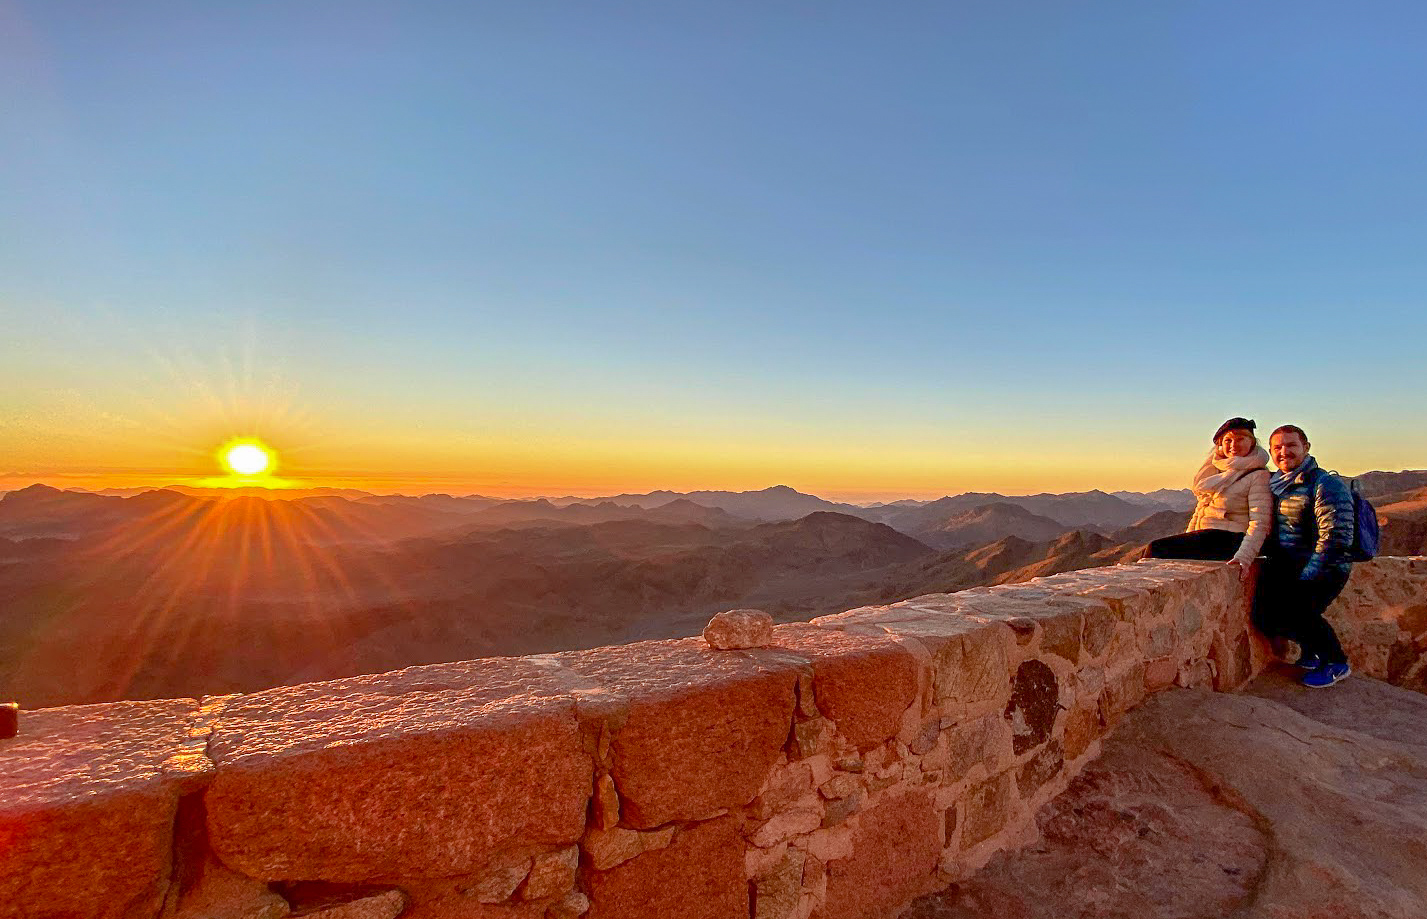 Rosie and Karl sitting on a wall as the sun rises at the summit of Mount Sinai, Egypt